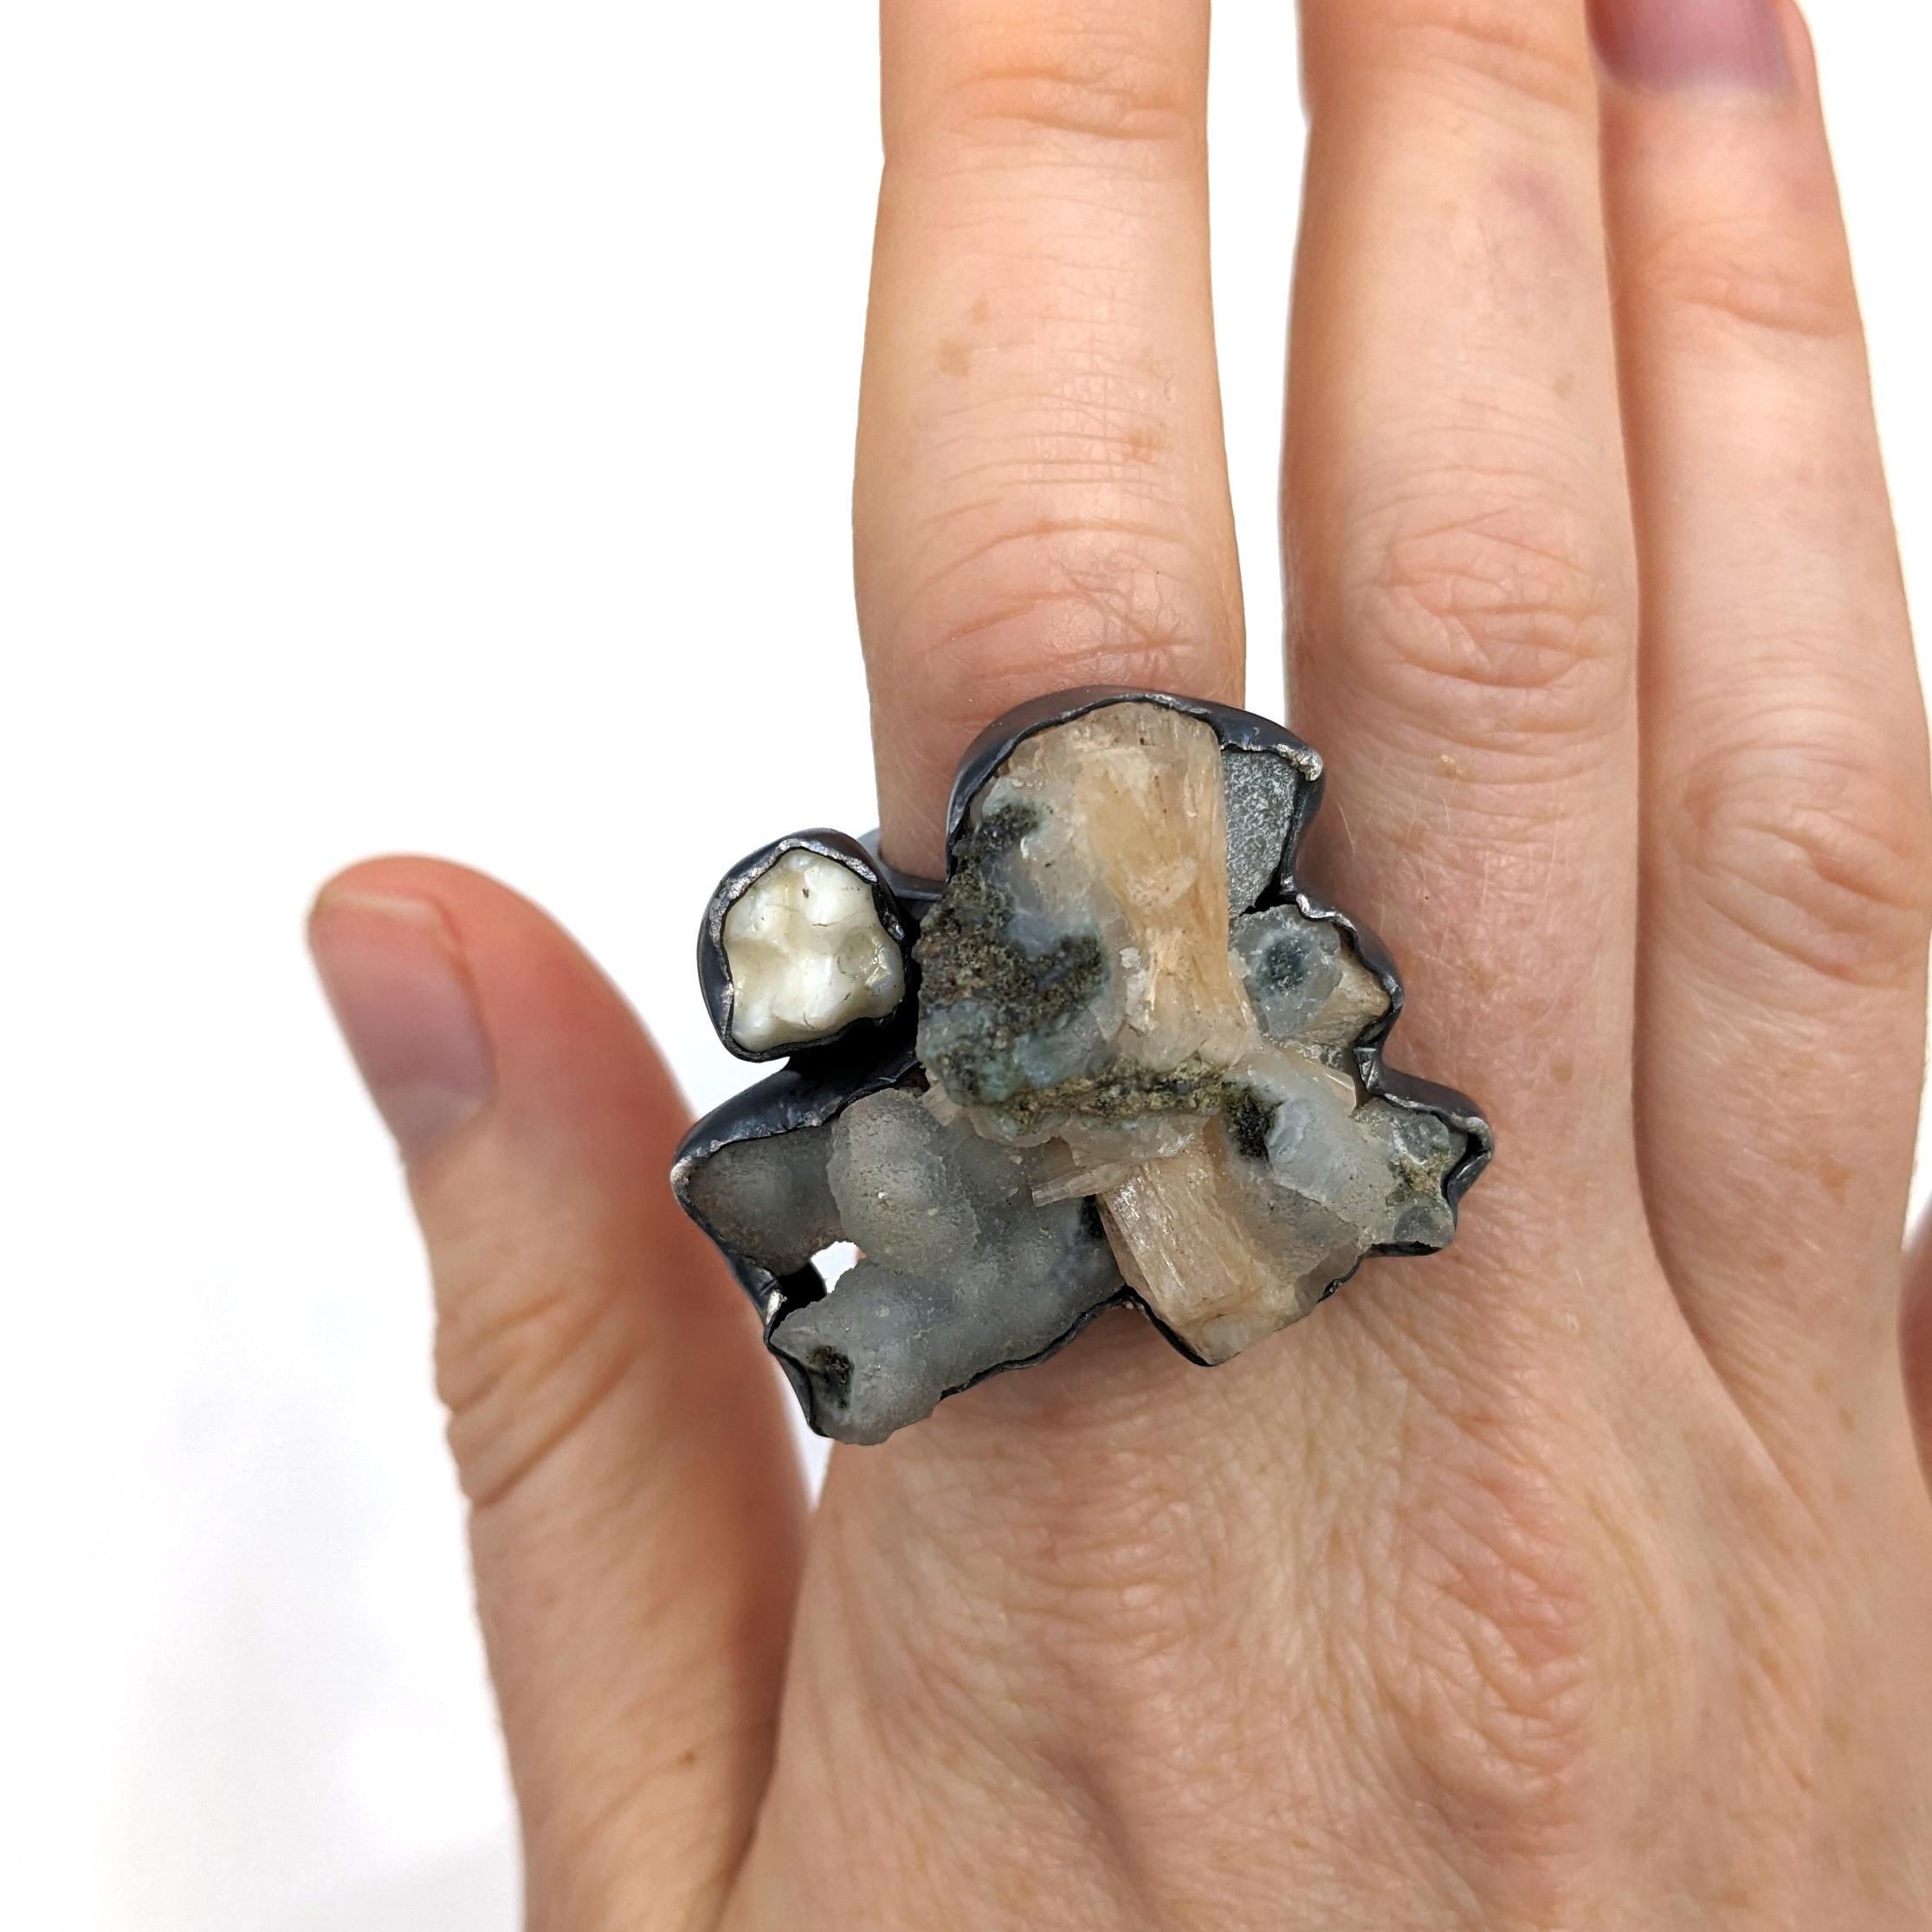 The Phyla-Roda ring features Apophylite, Silbite, a raccoon tooth, and silver. The top face of the ring measures approximately 1.25